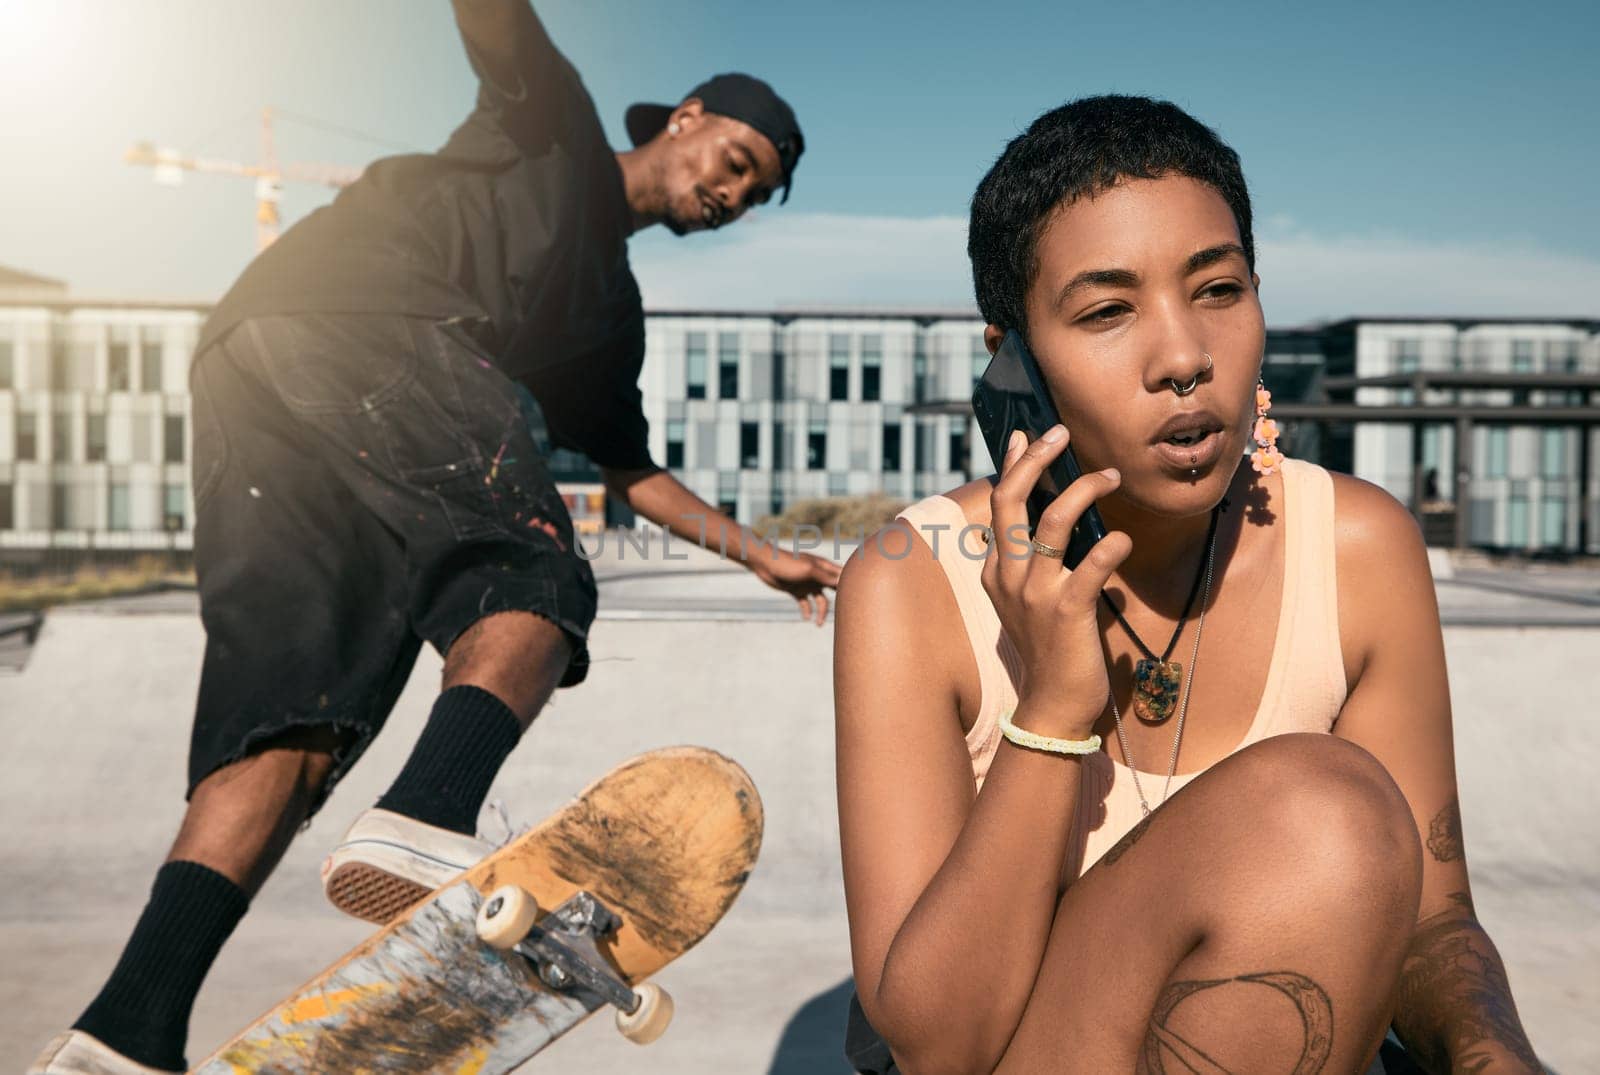 Skateboard, summer and phone call with friends at urban city hangout in sunshine together. Skater people at recreation facility for outdoor activity and 5g mobile connection in New York